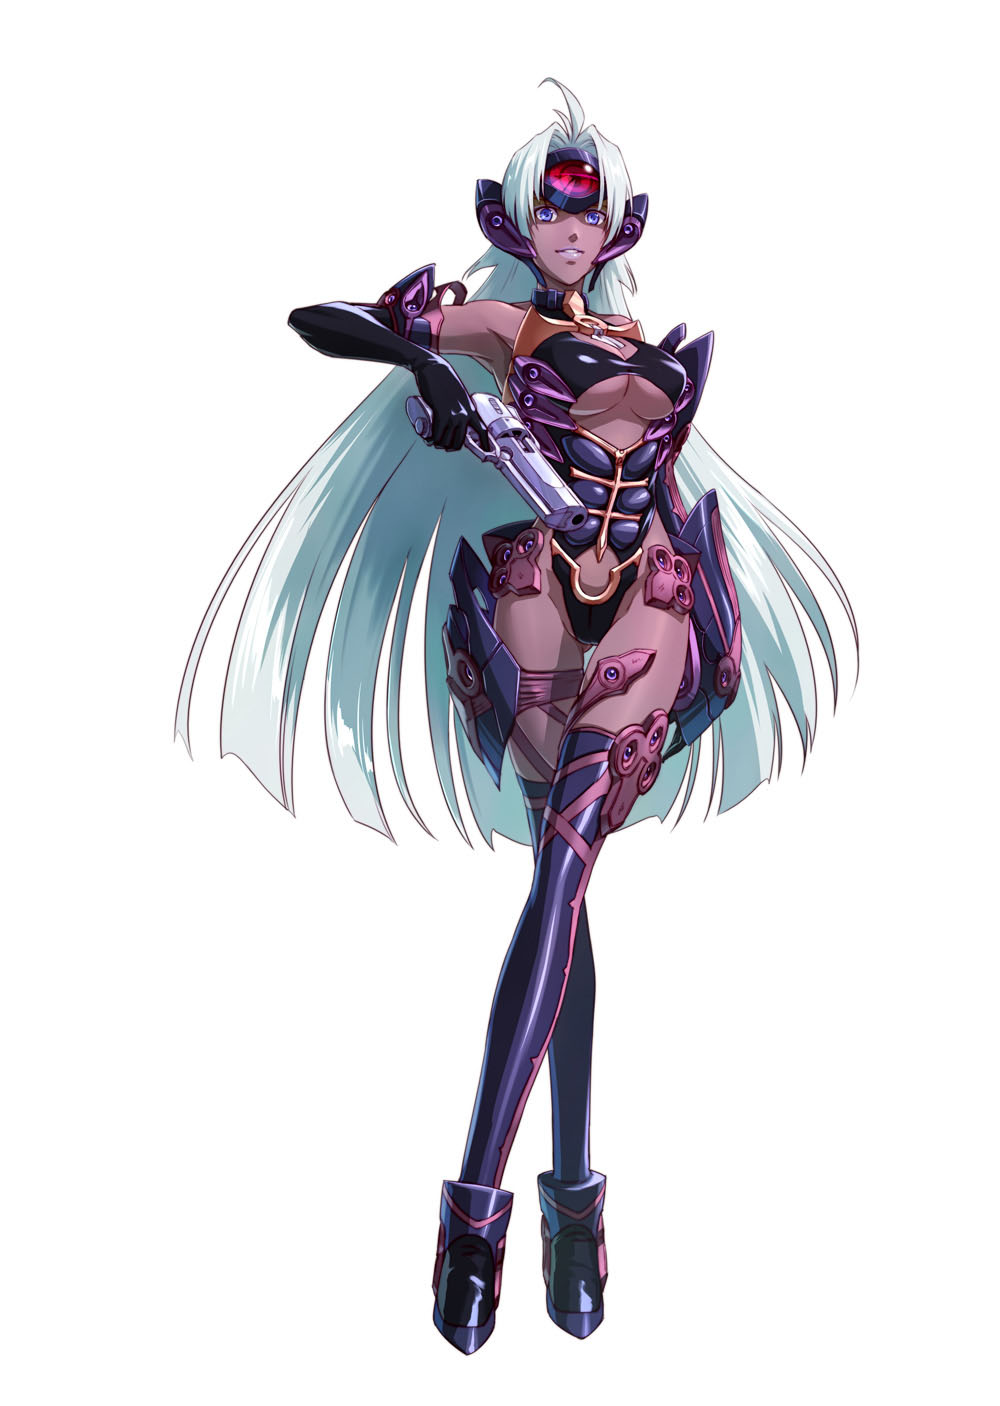 Today we bring you a set of images from the upcoming Project X Zone. 